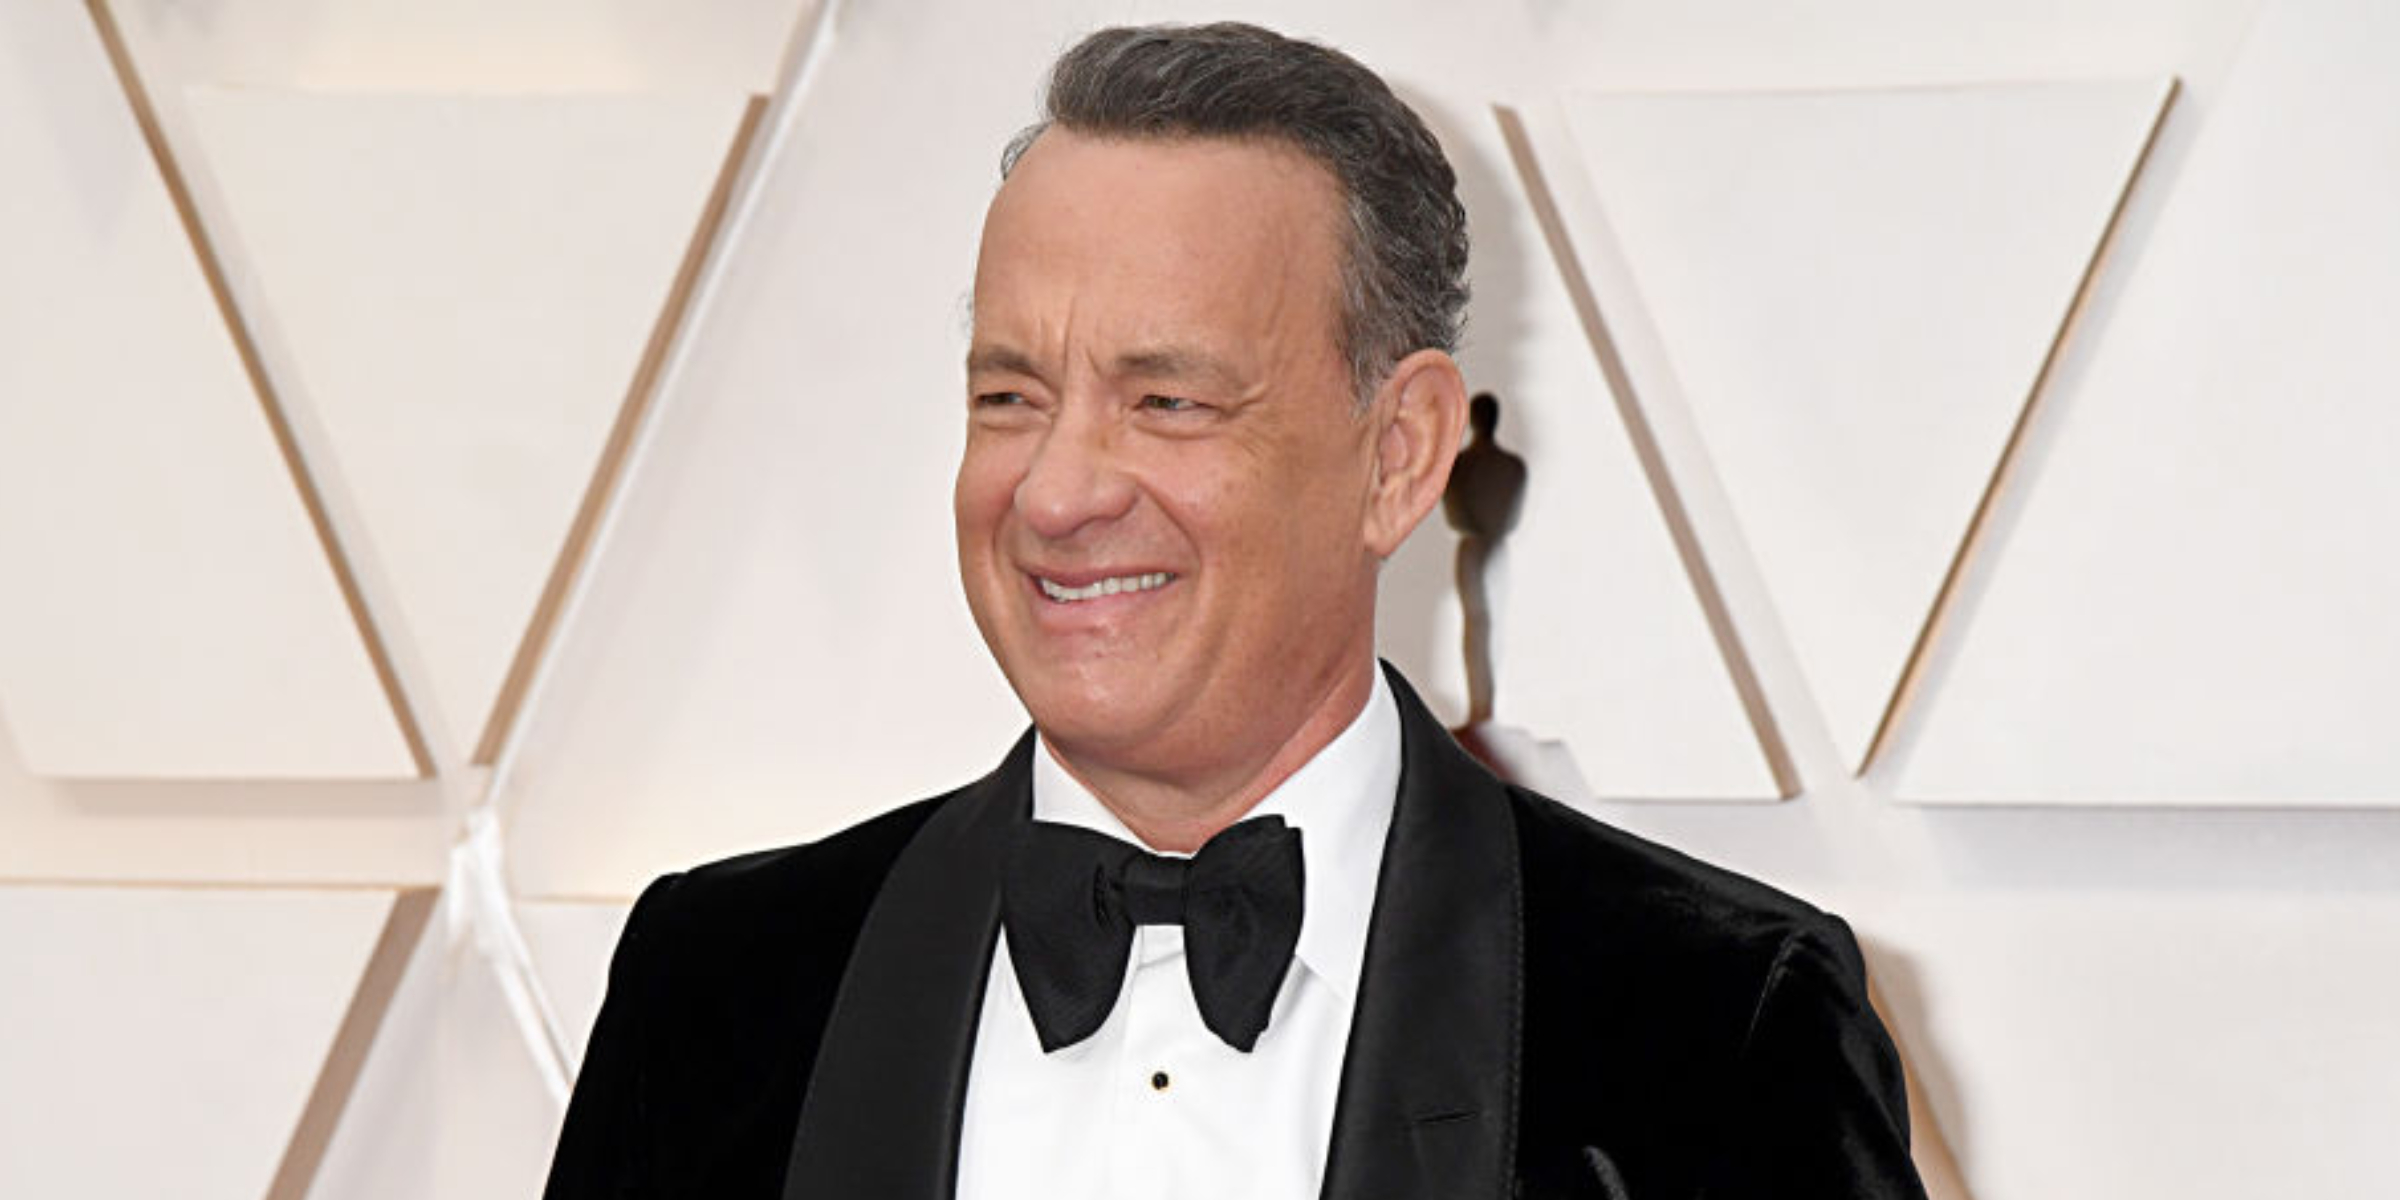 Tom Hanks | Source : Getty Images